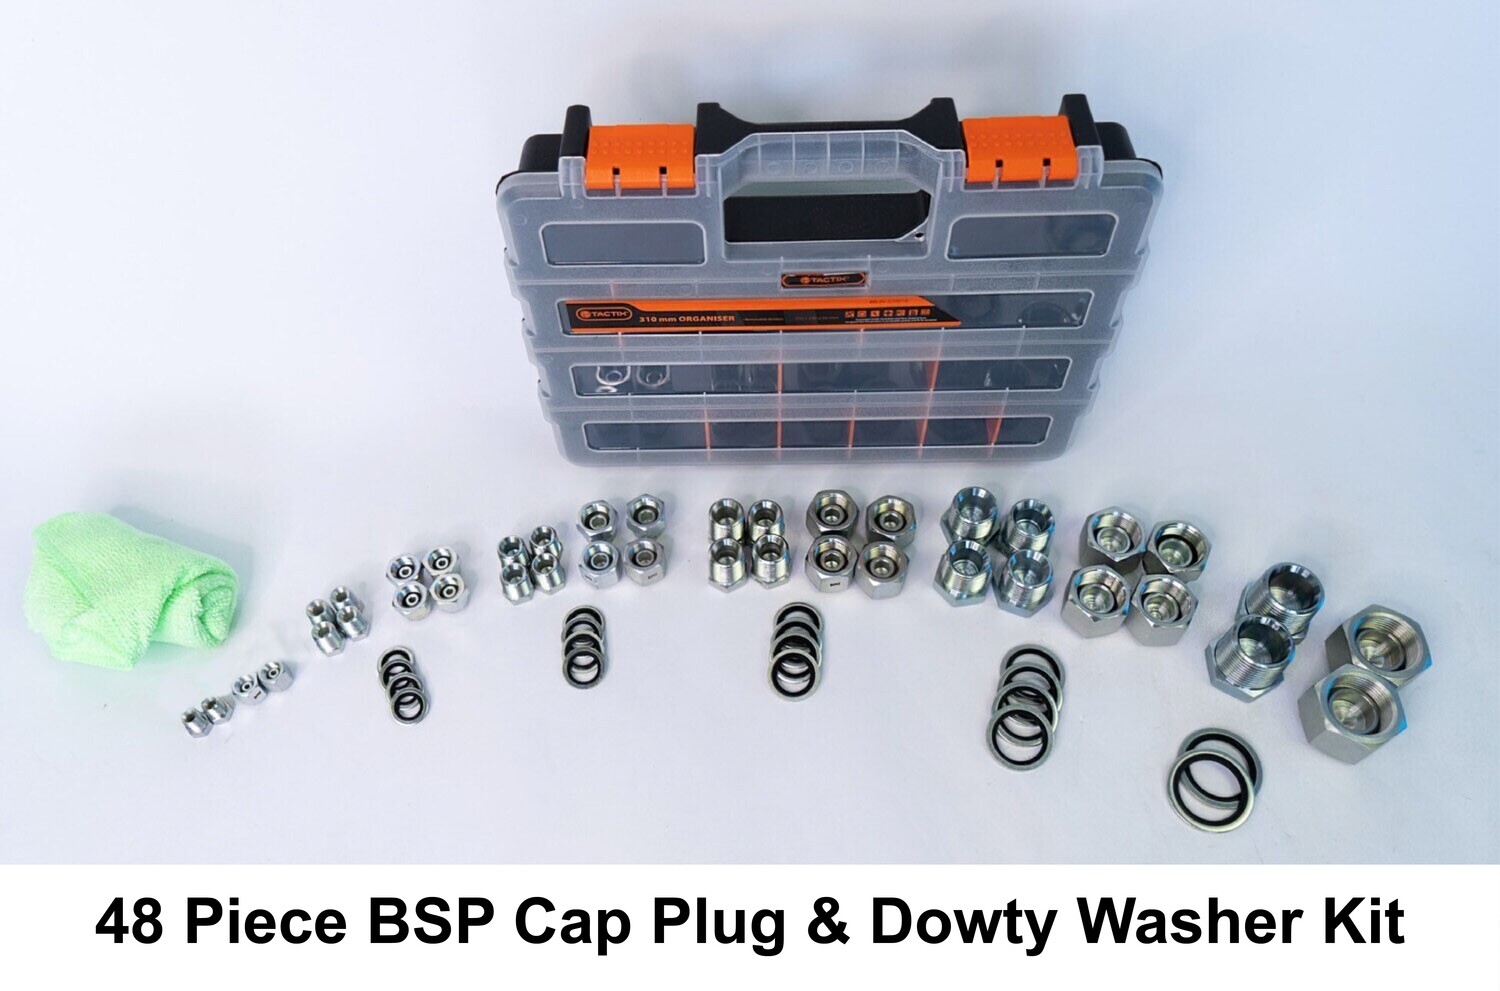 BSP Plug and Caps Kit contents chart